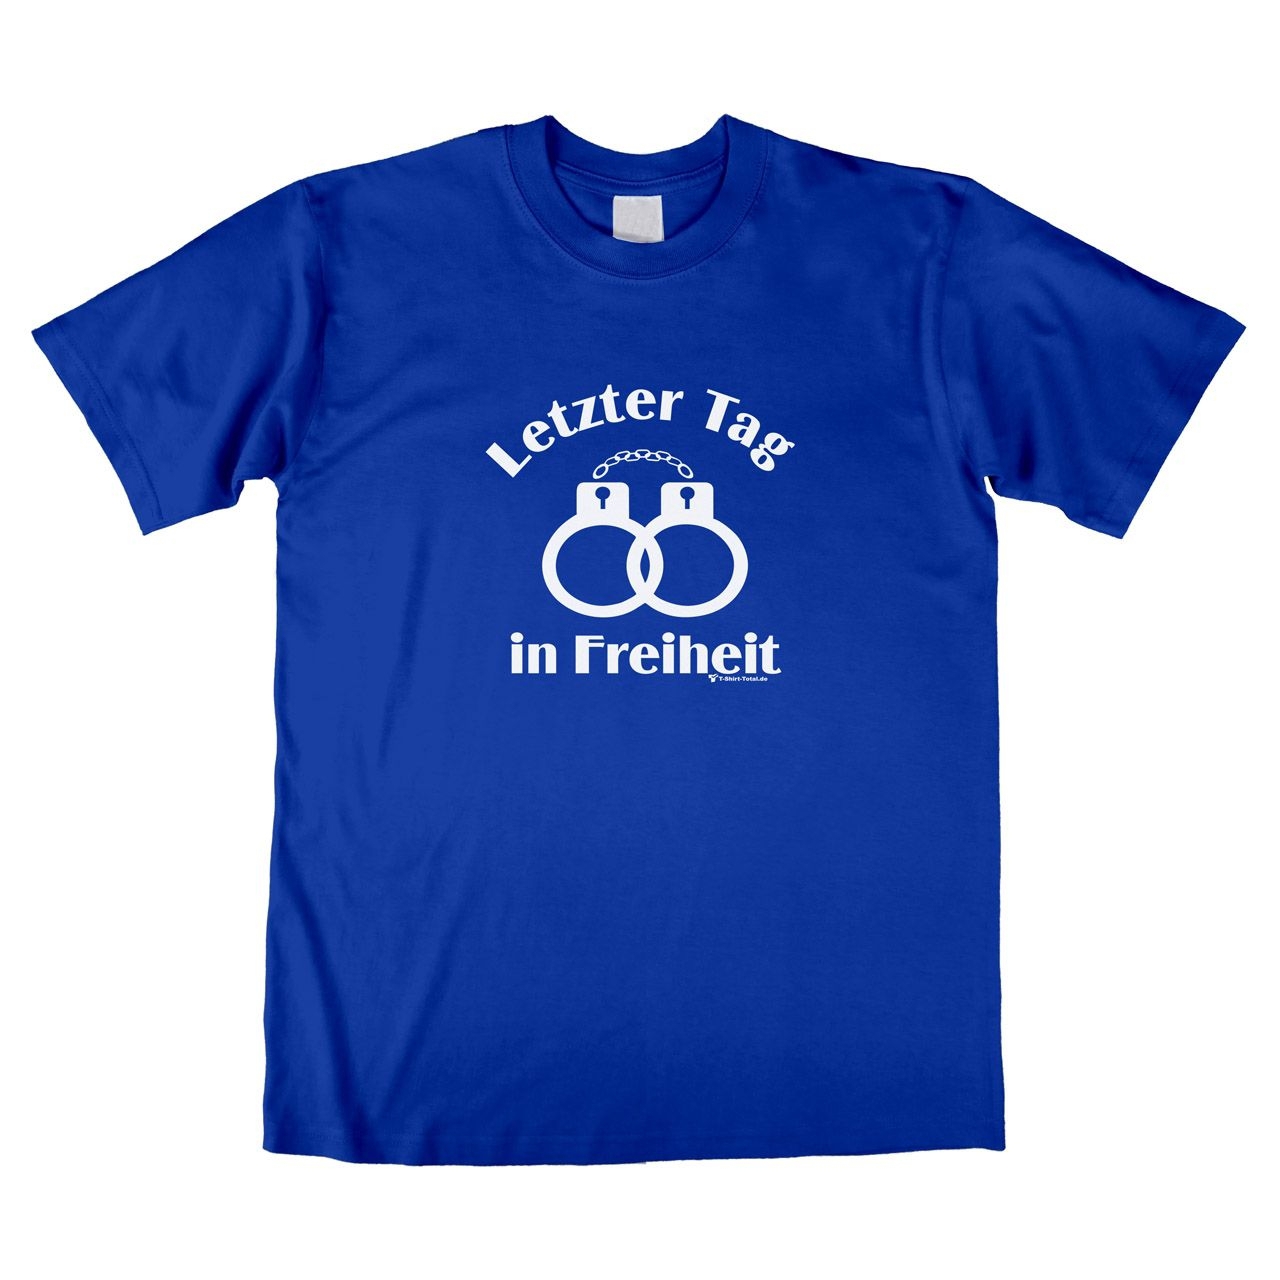 Letzter Tag in Freiheit Unisex T-Shirt royal Extra Large